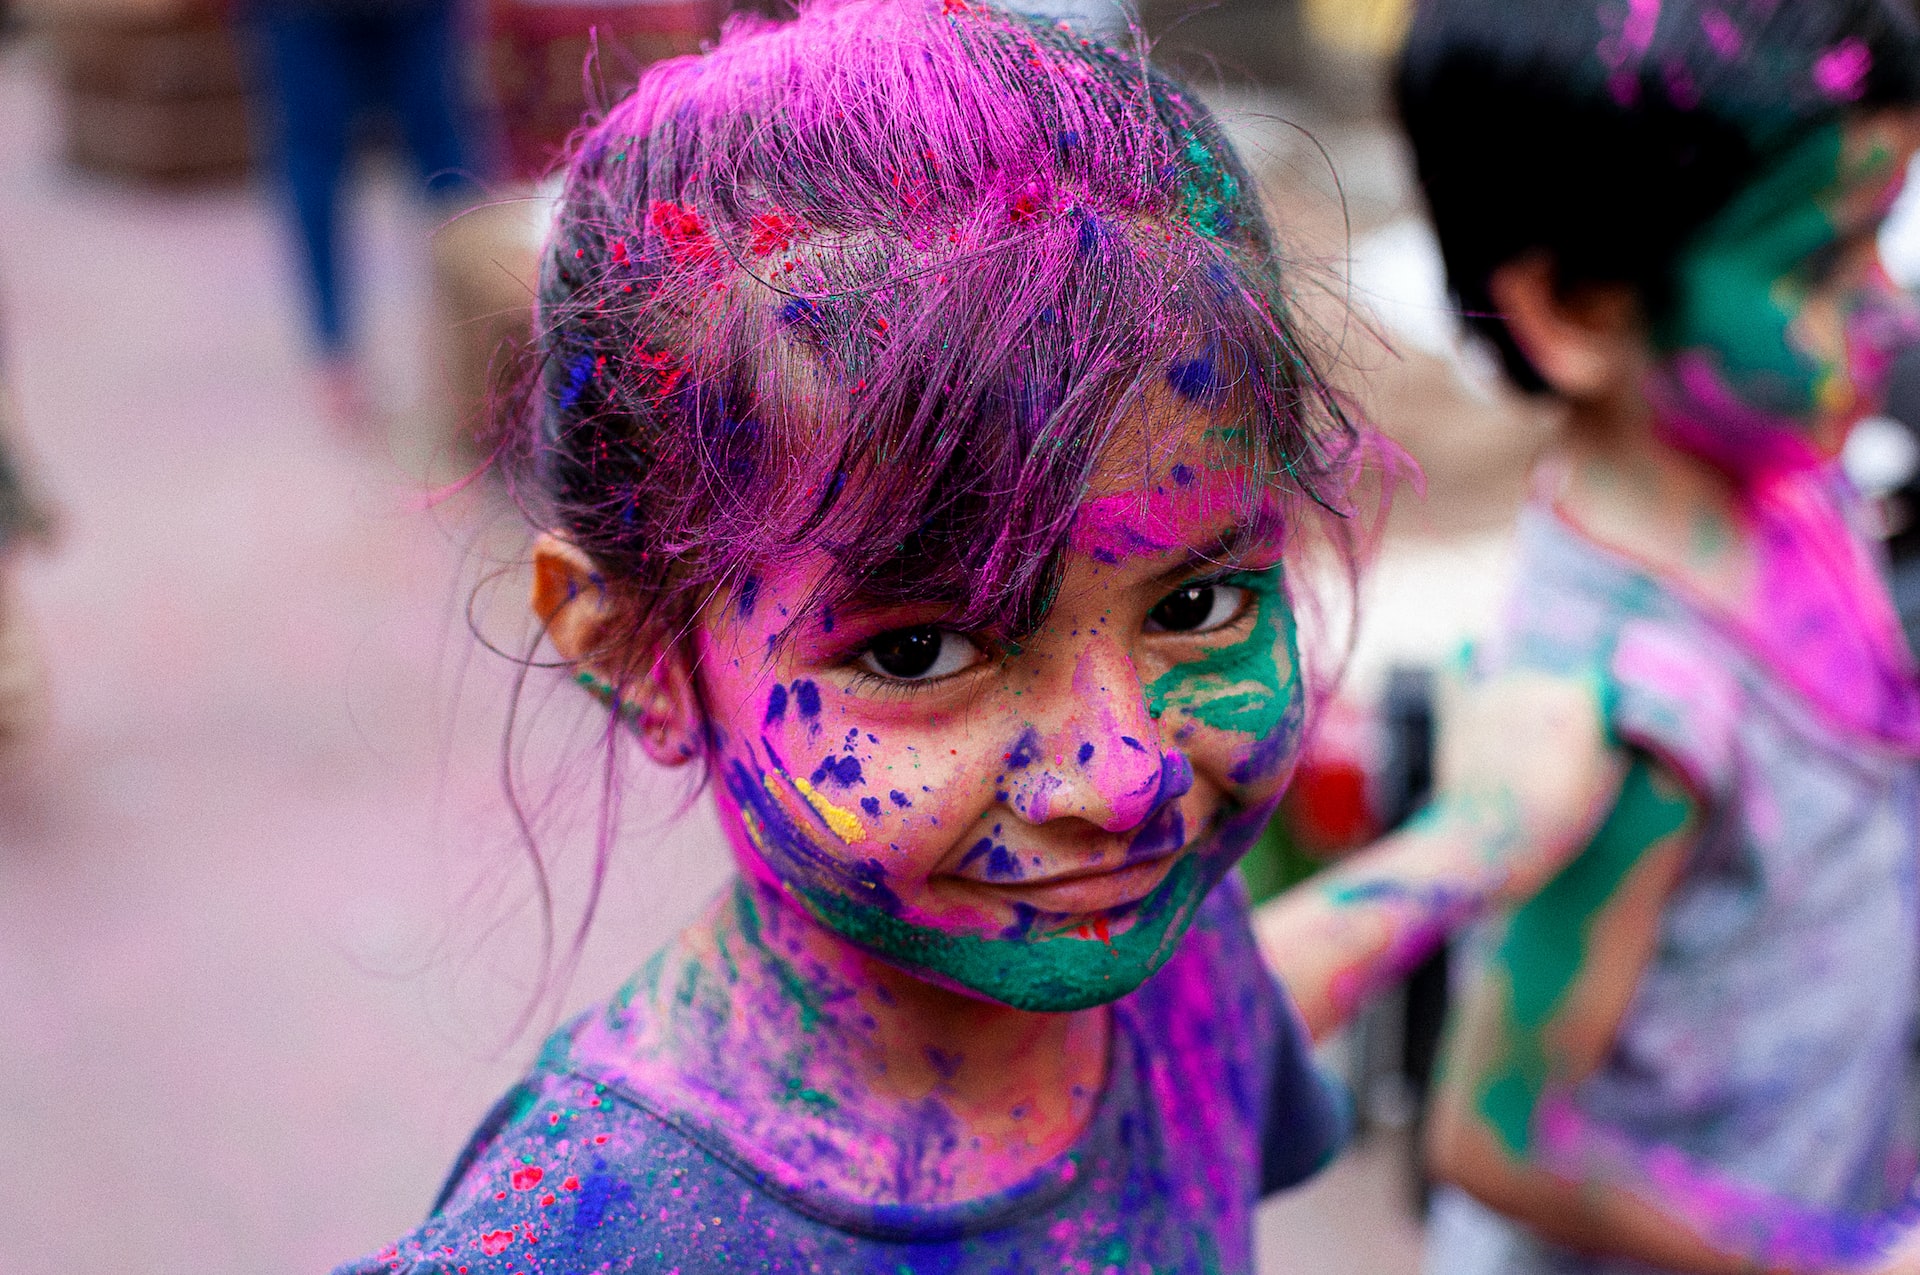 A young girl with a face full of colorful powder.